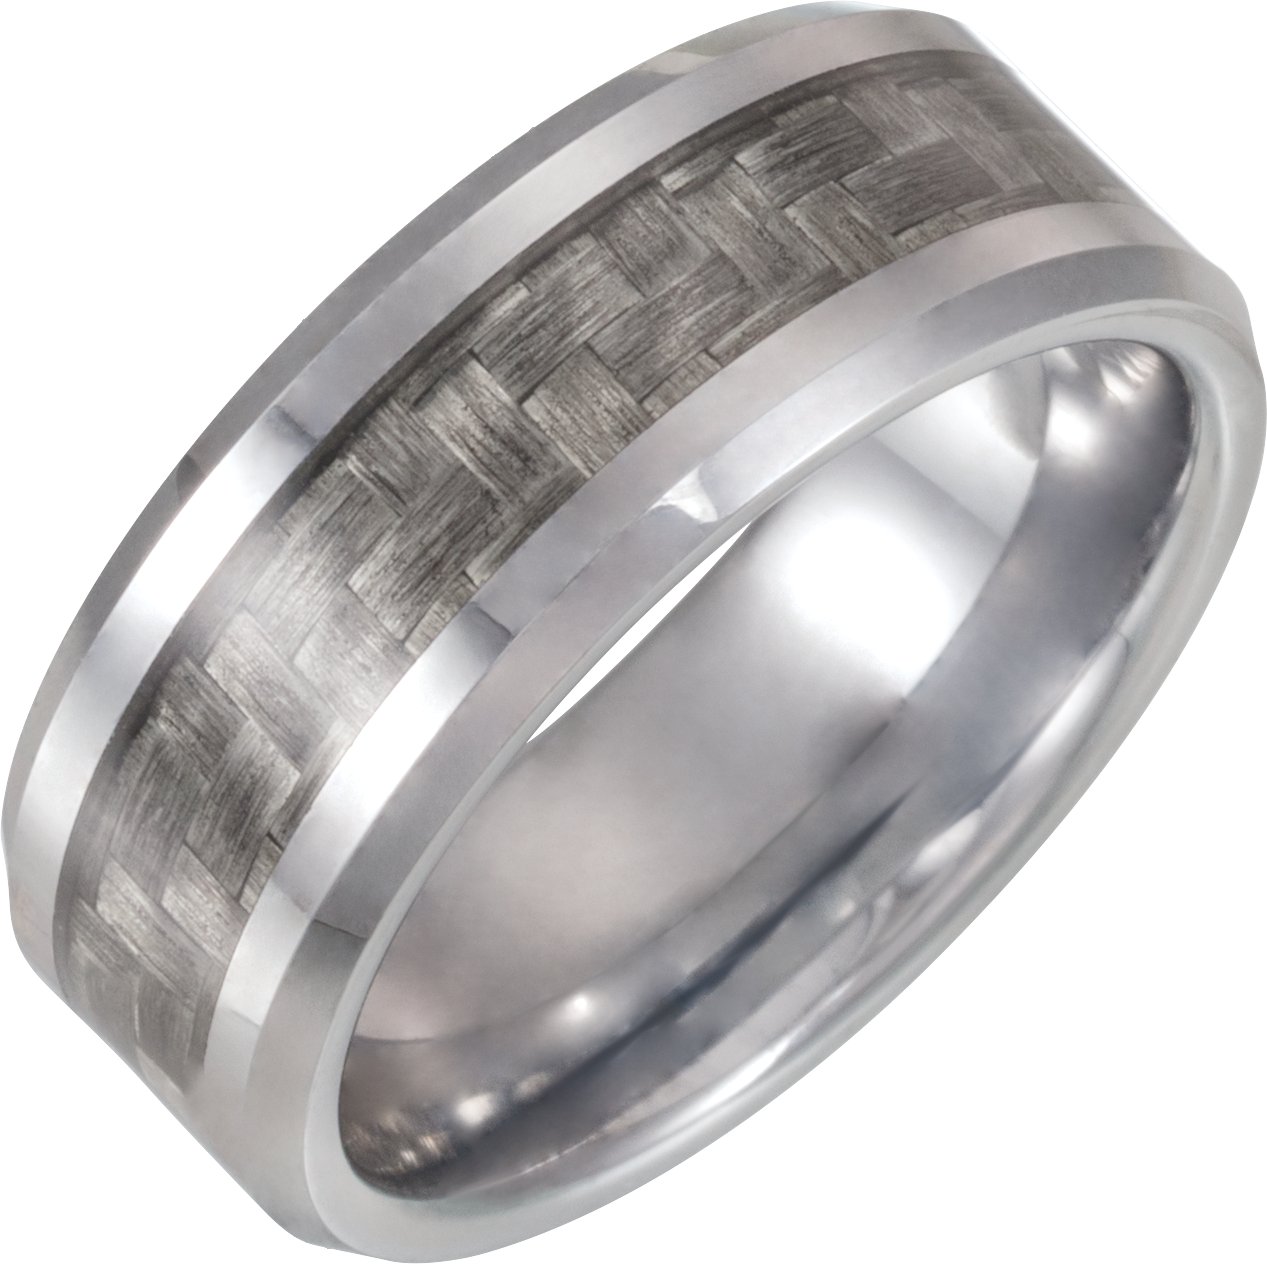 Tungsten 8 mm Band with Carbon Fiber Inlay Size 10.5